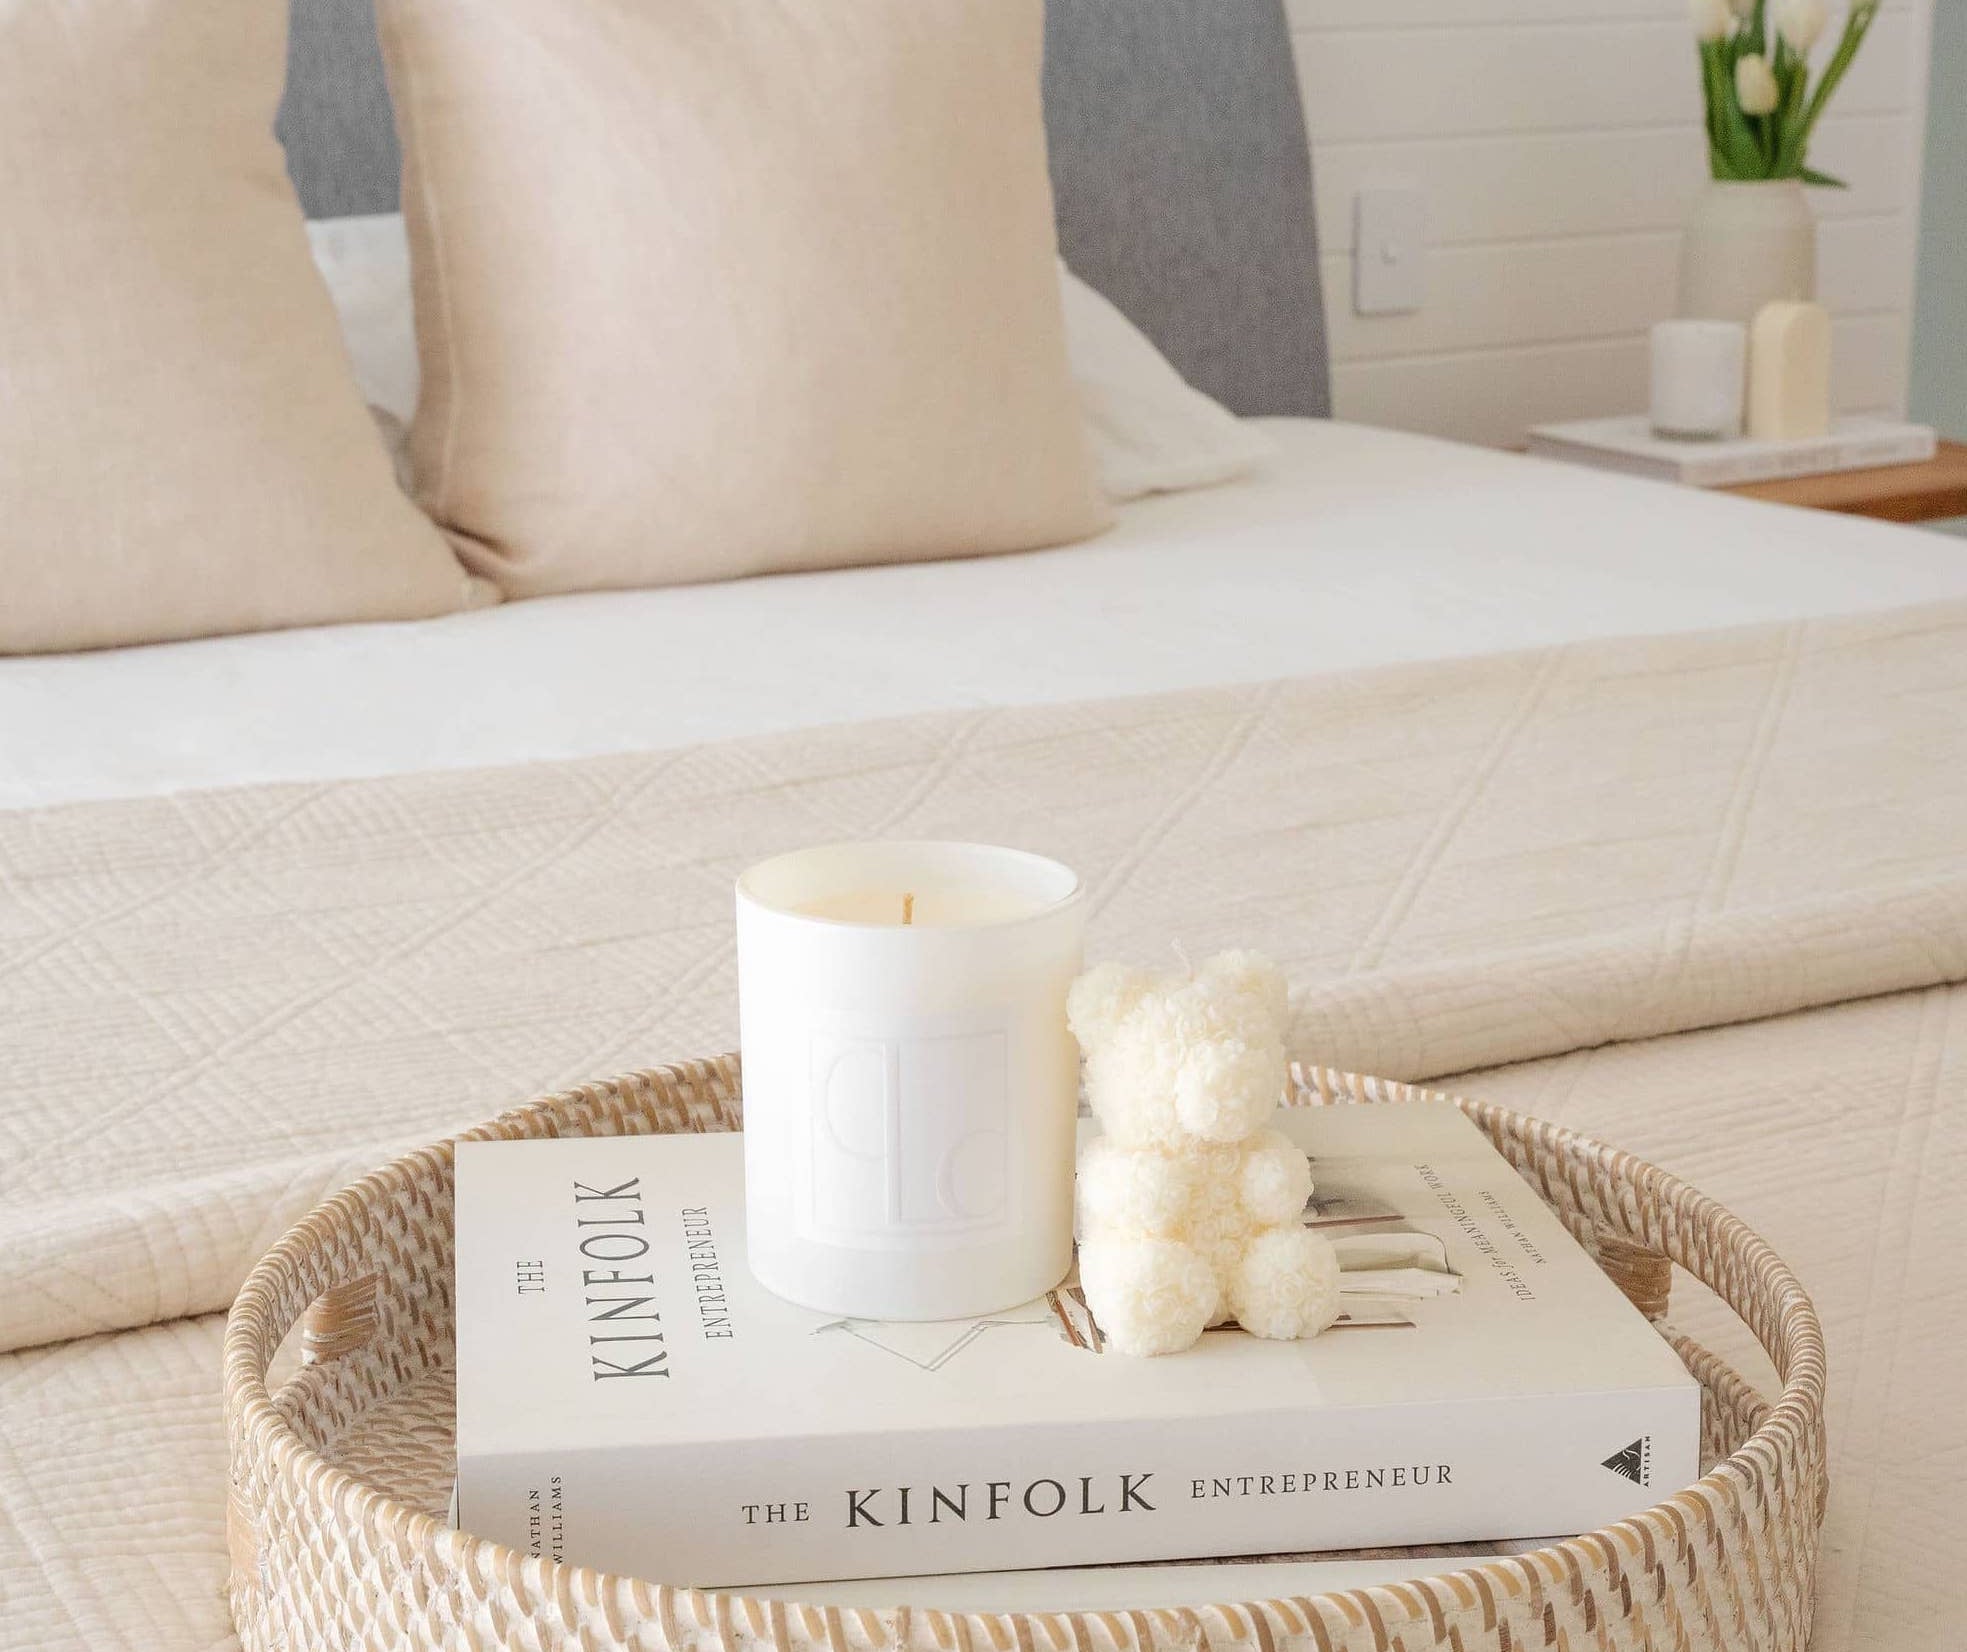 Caitlin Louise Collection salty caramel kiss soy candle styled with Aria sculptural candle on a book and tray - on a bed in a beautiful bedroom.